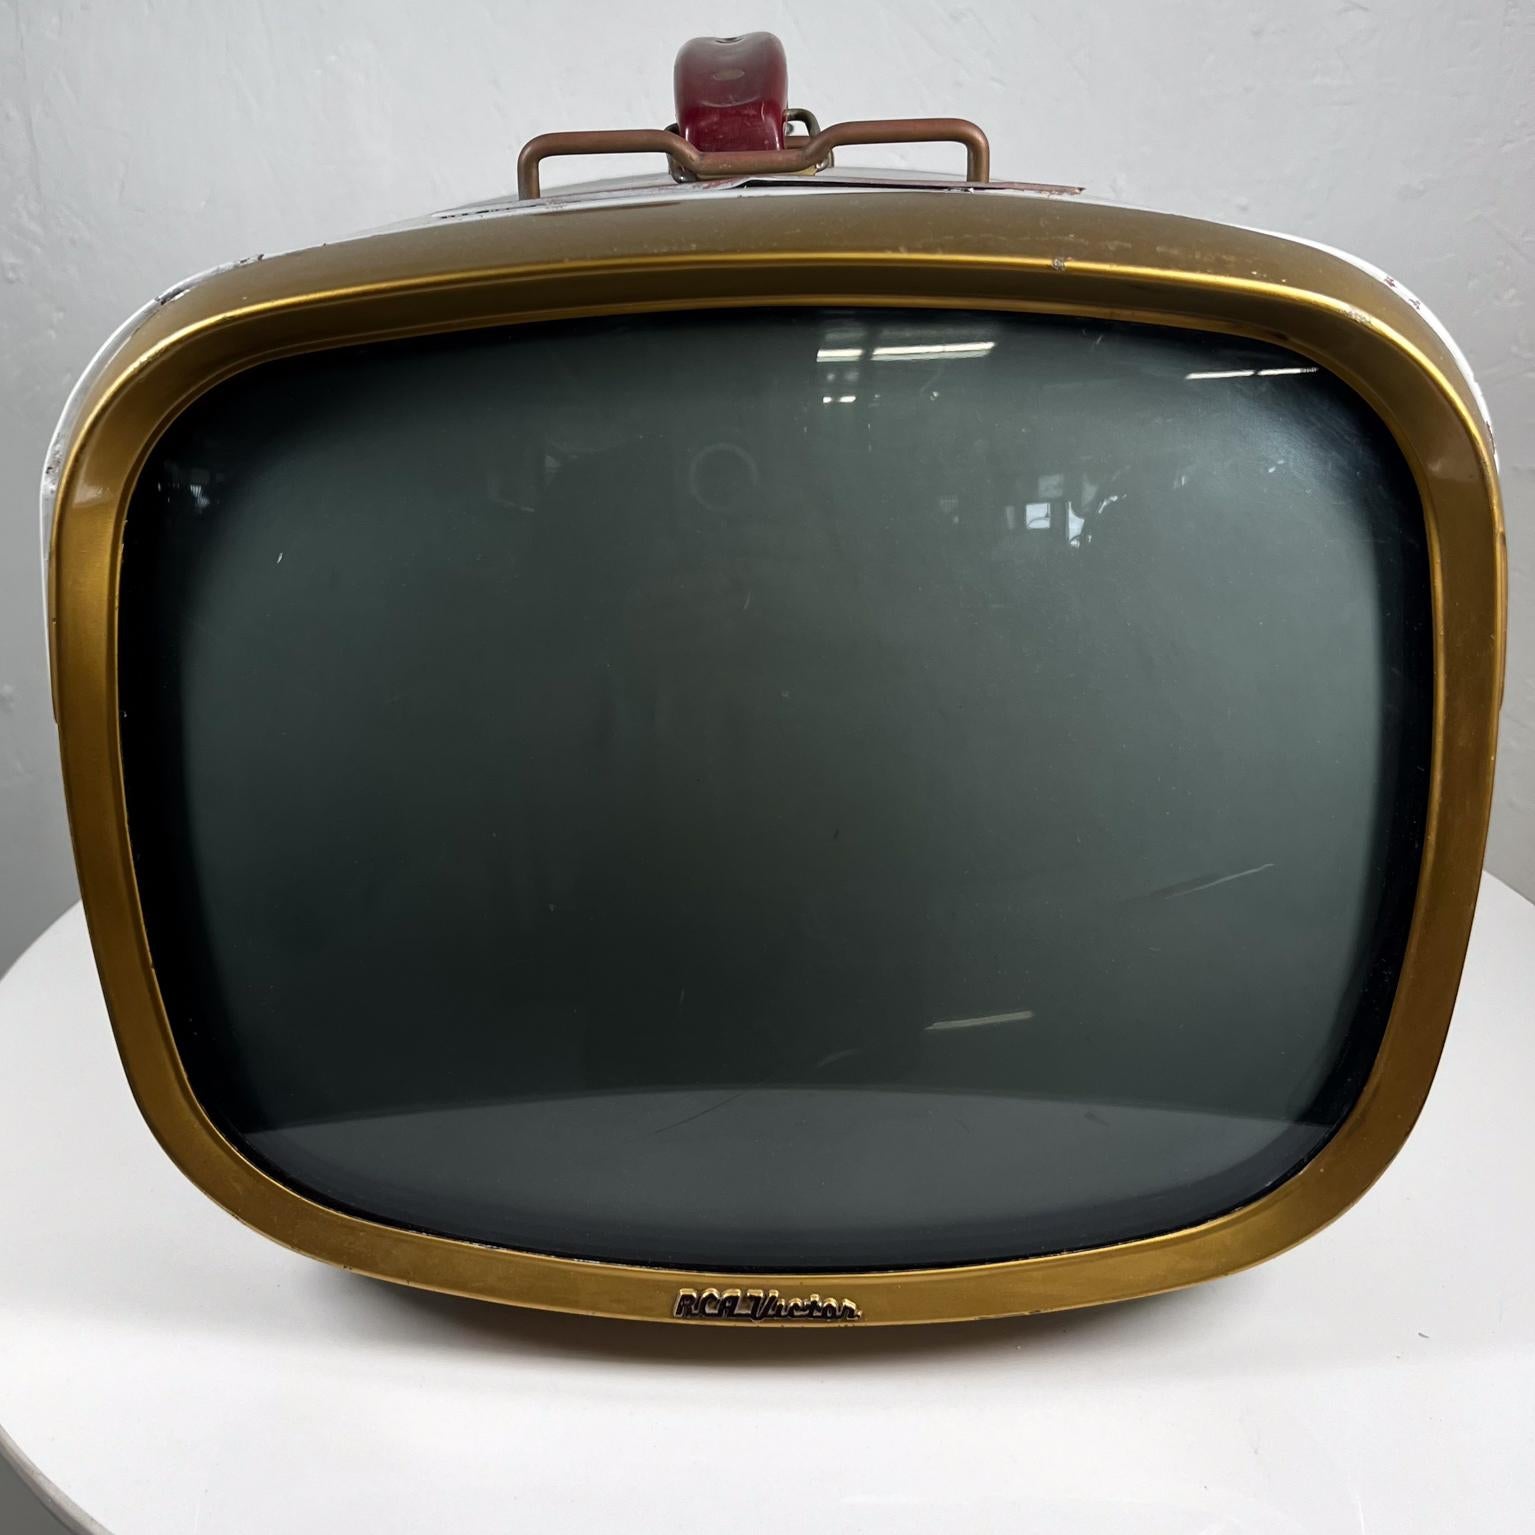 Metal 1950s Portable Tube TV Deluxe RCA Victor Television New Jersey